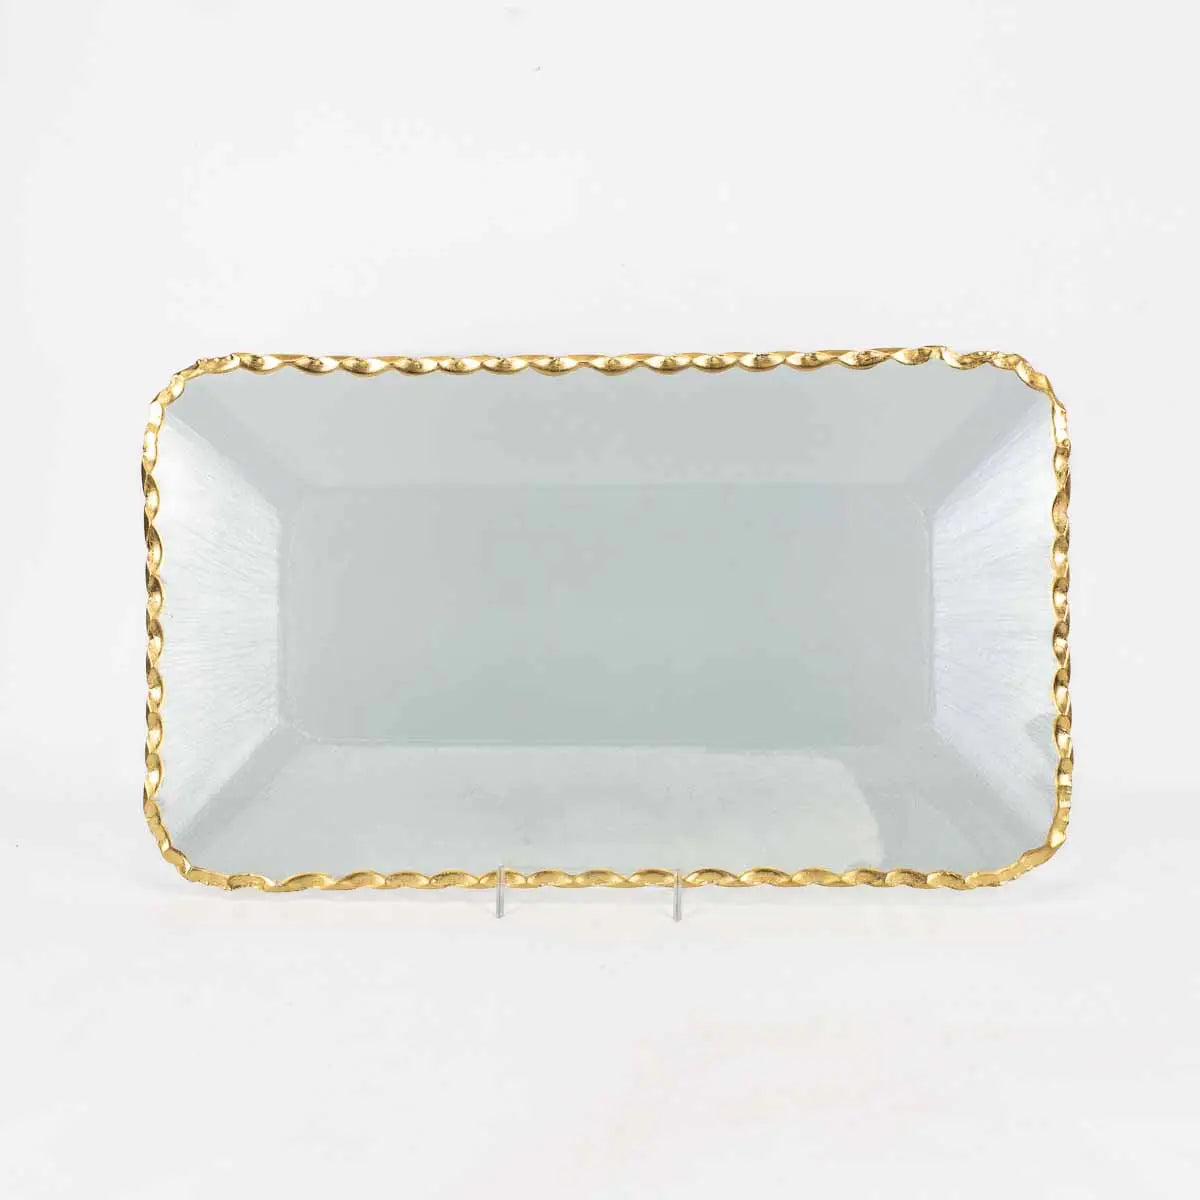 Glass Rectangle Serving Tray w/gold trim